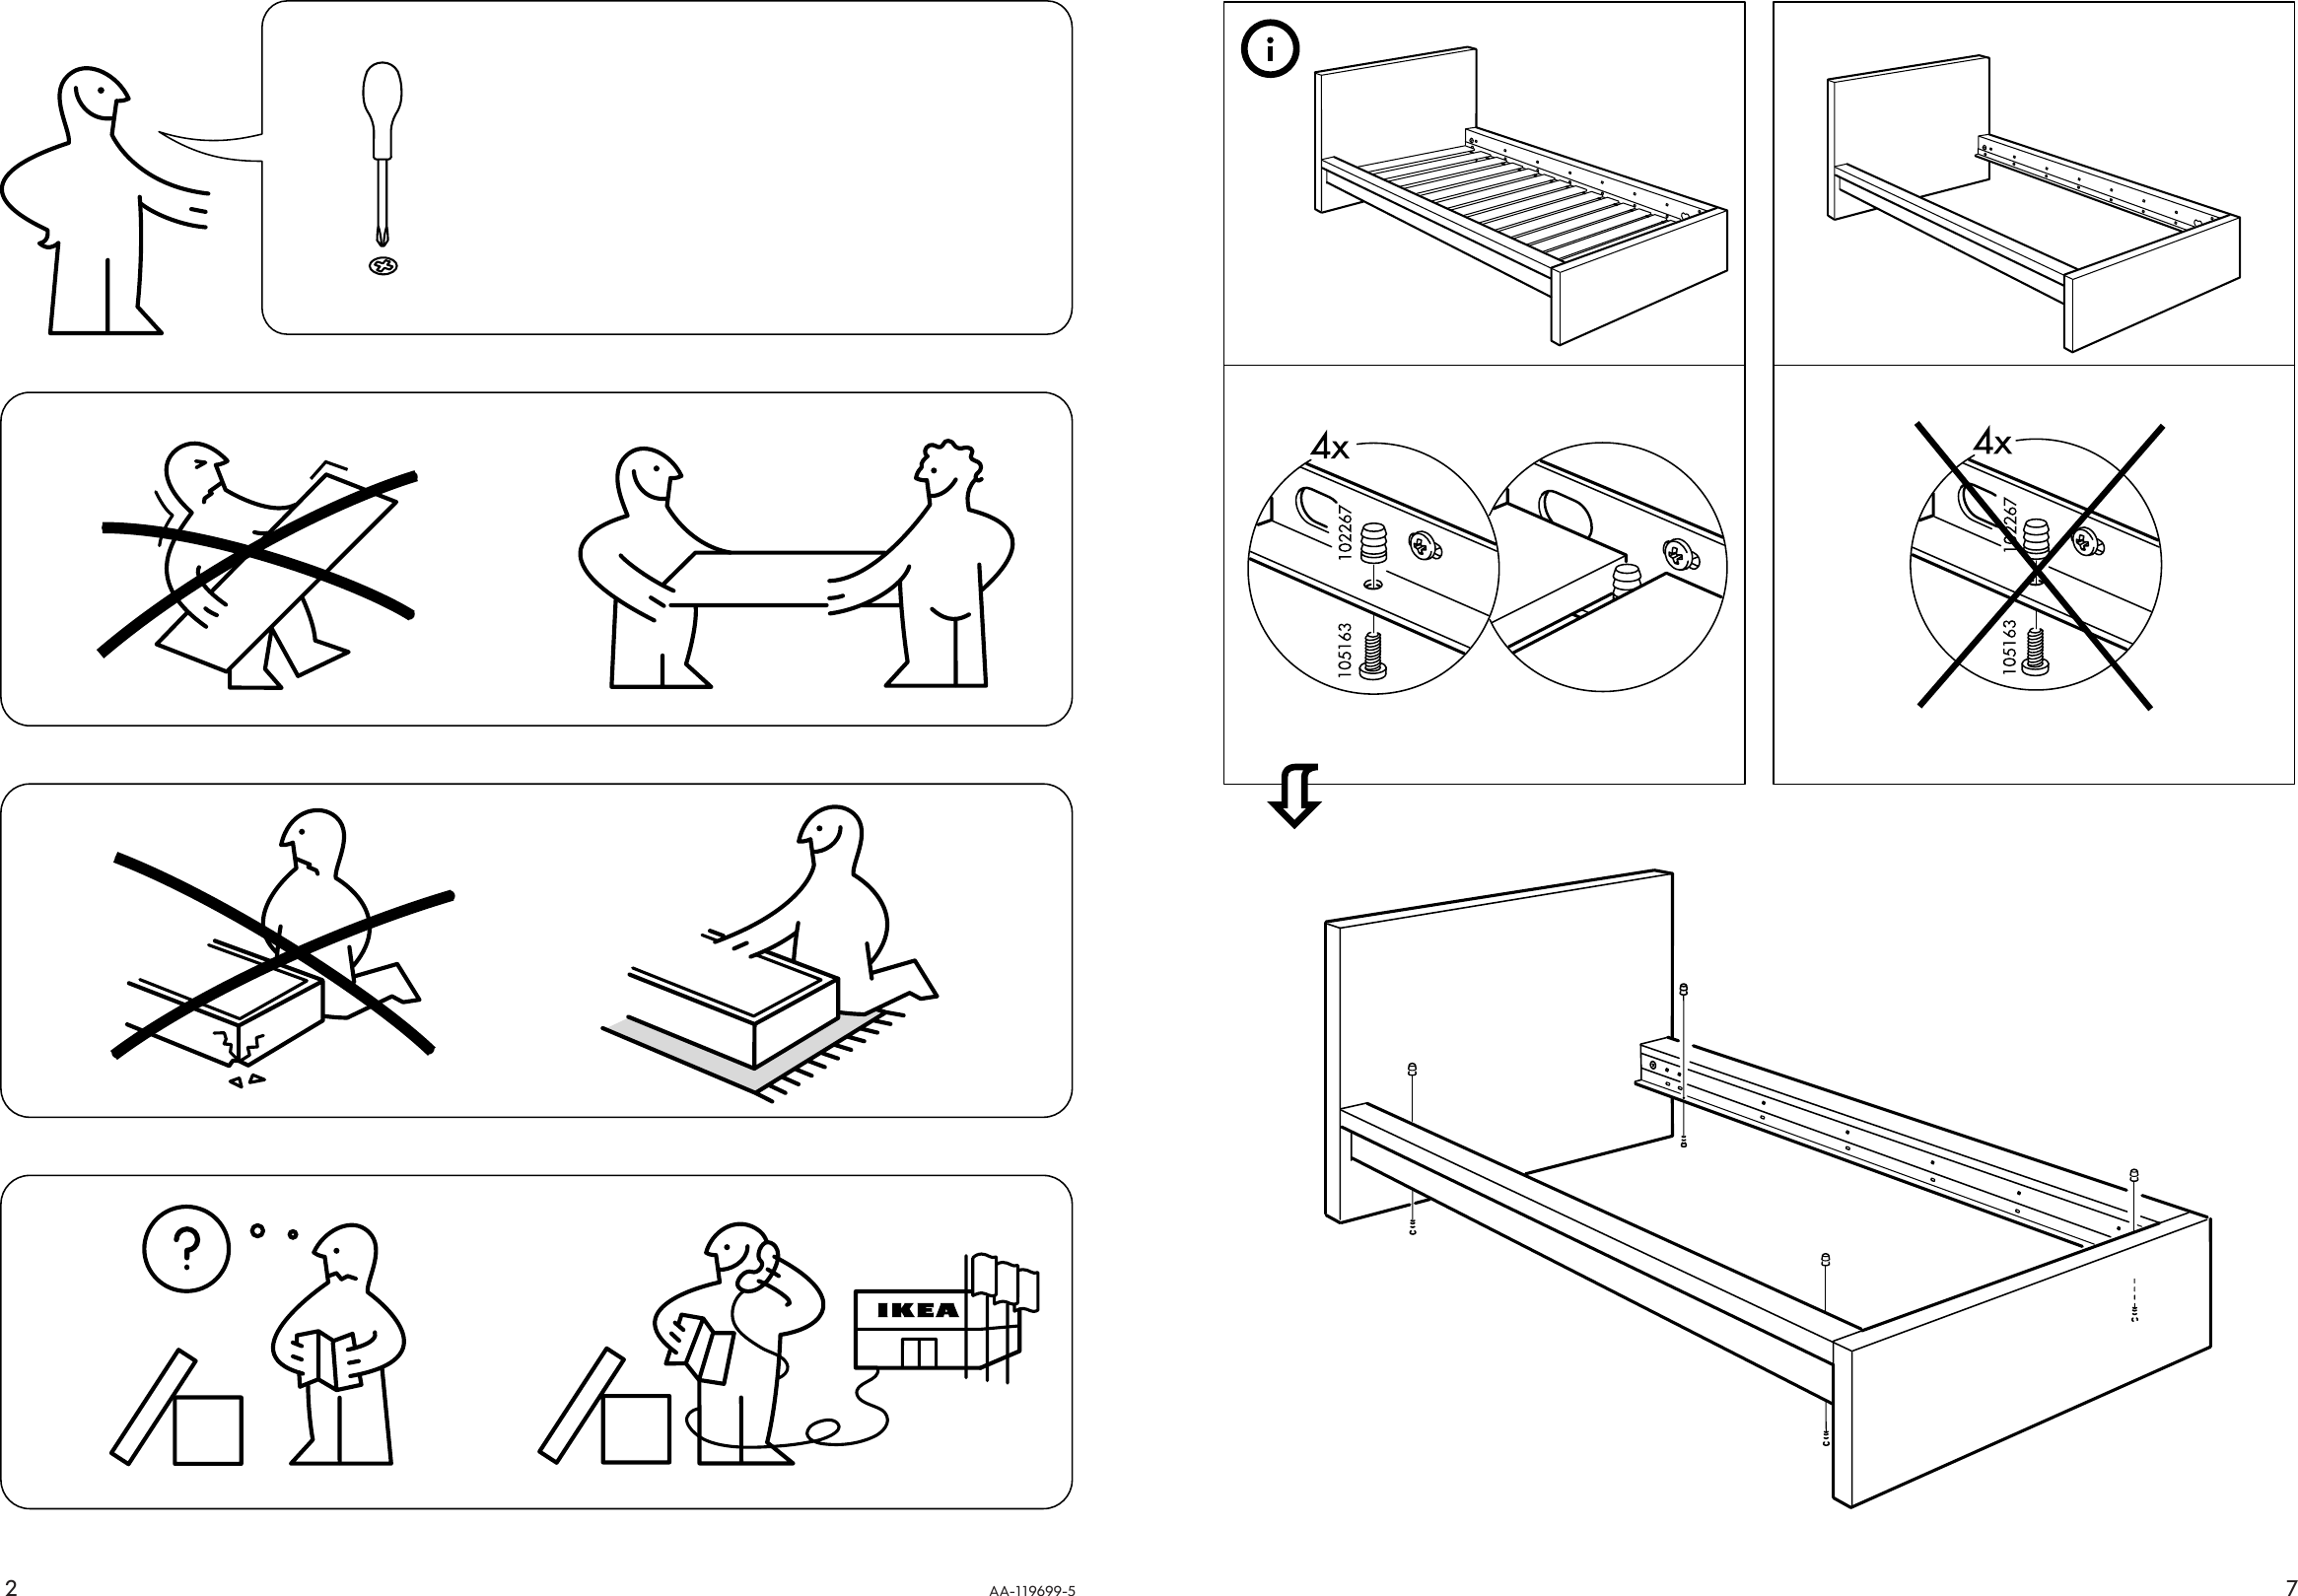 Ikea Malm Bed Frame Twin Assembly, Skorva Bed Frame Assembly Instructions